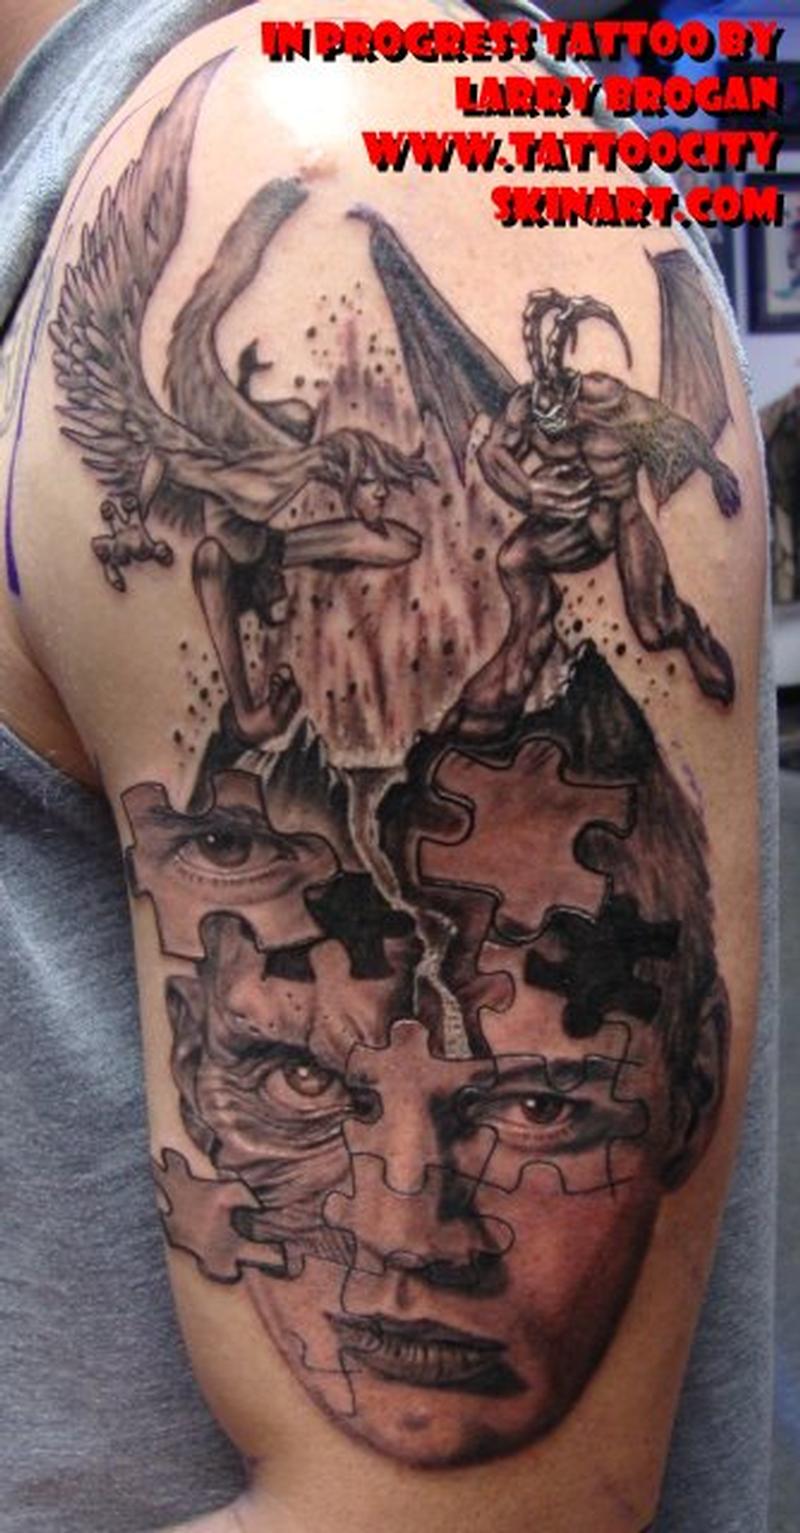 When All The Pieces Fit By Larry Brogan Tattoonow